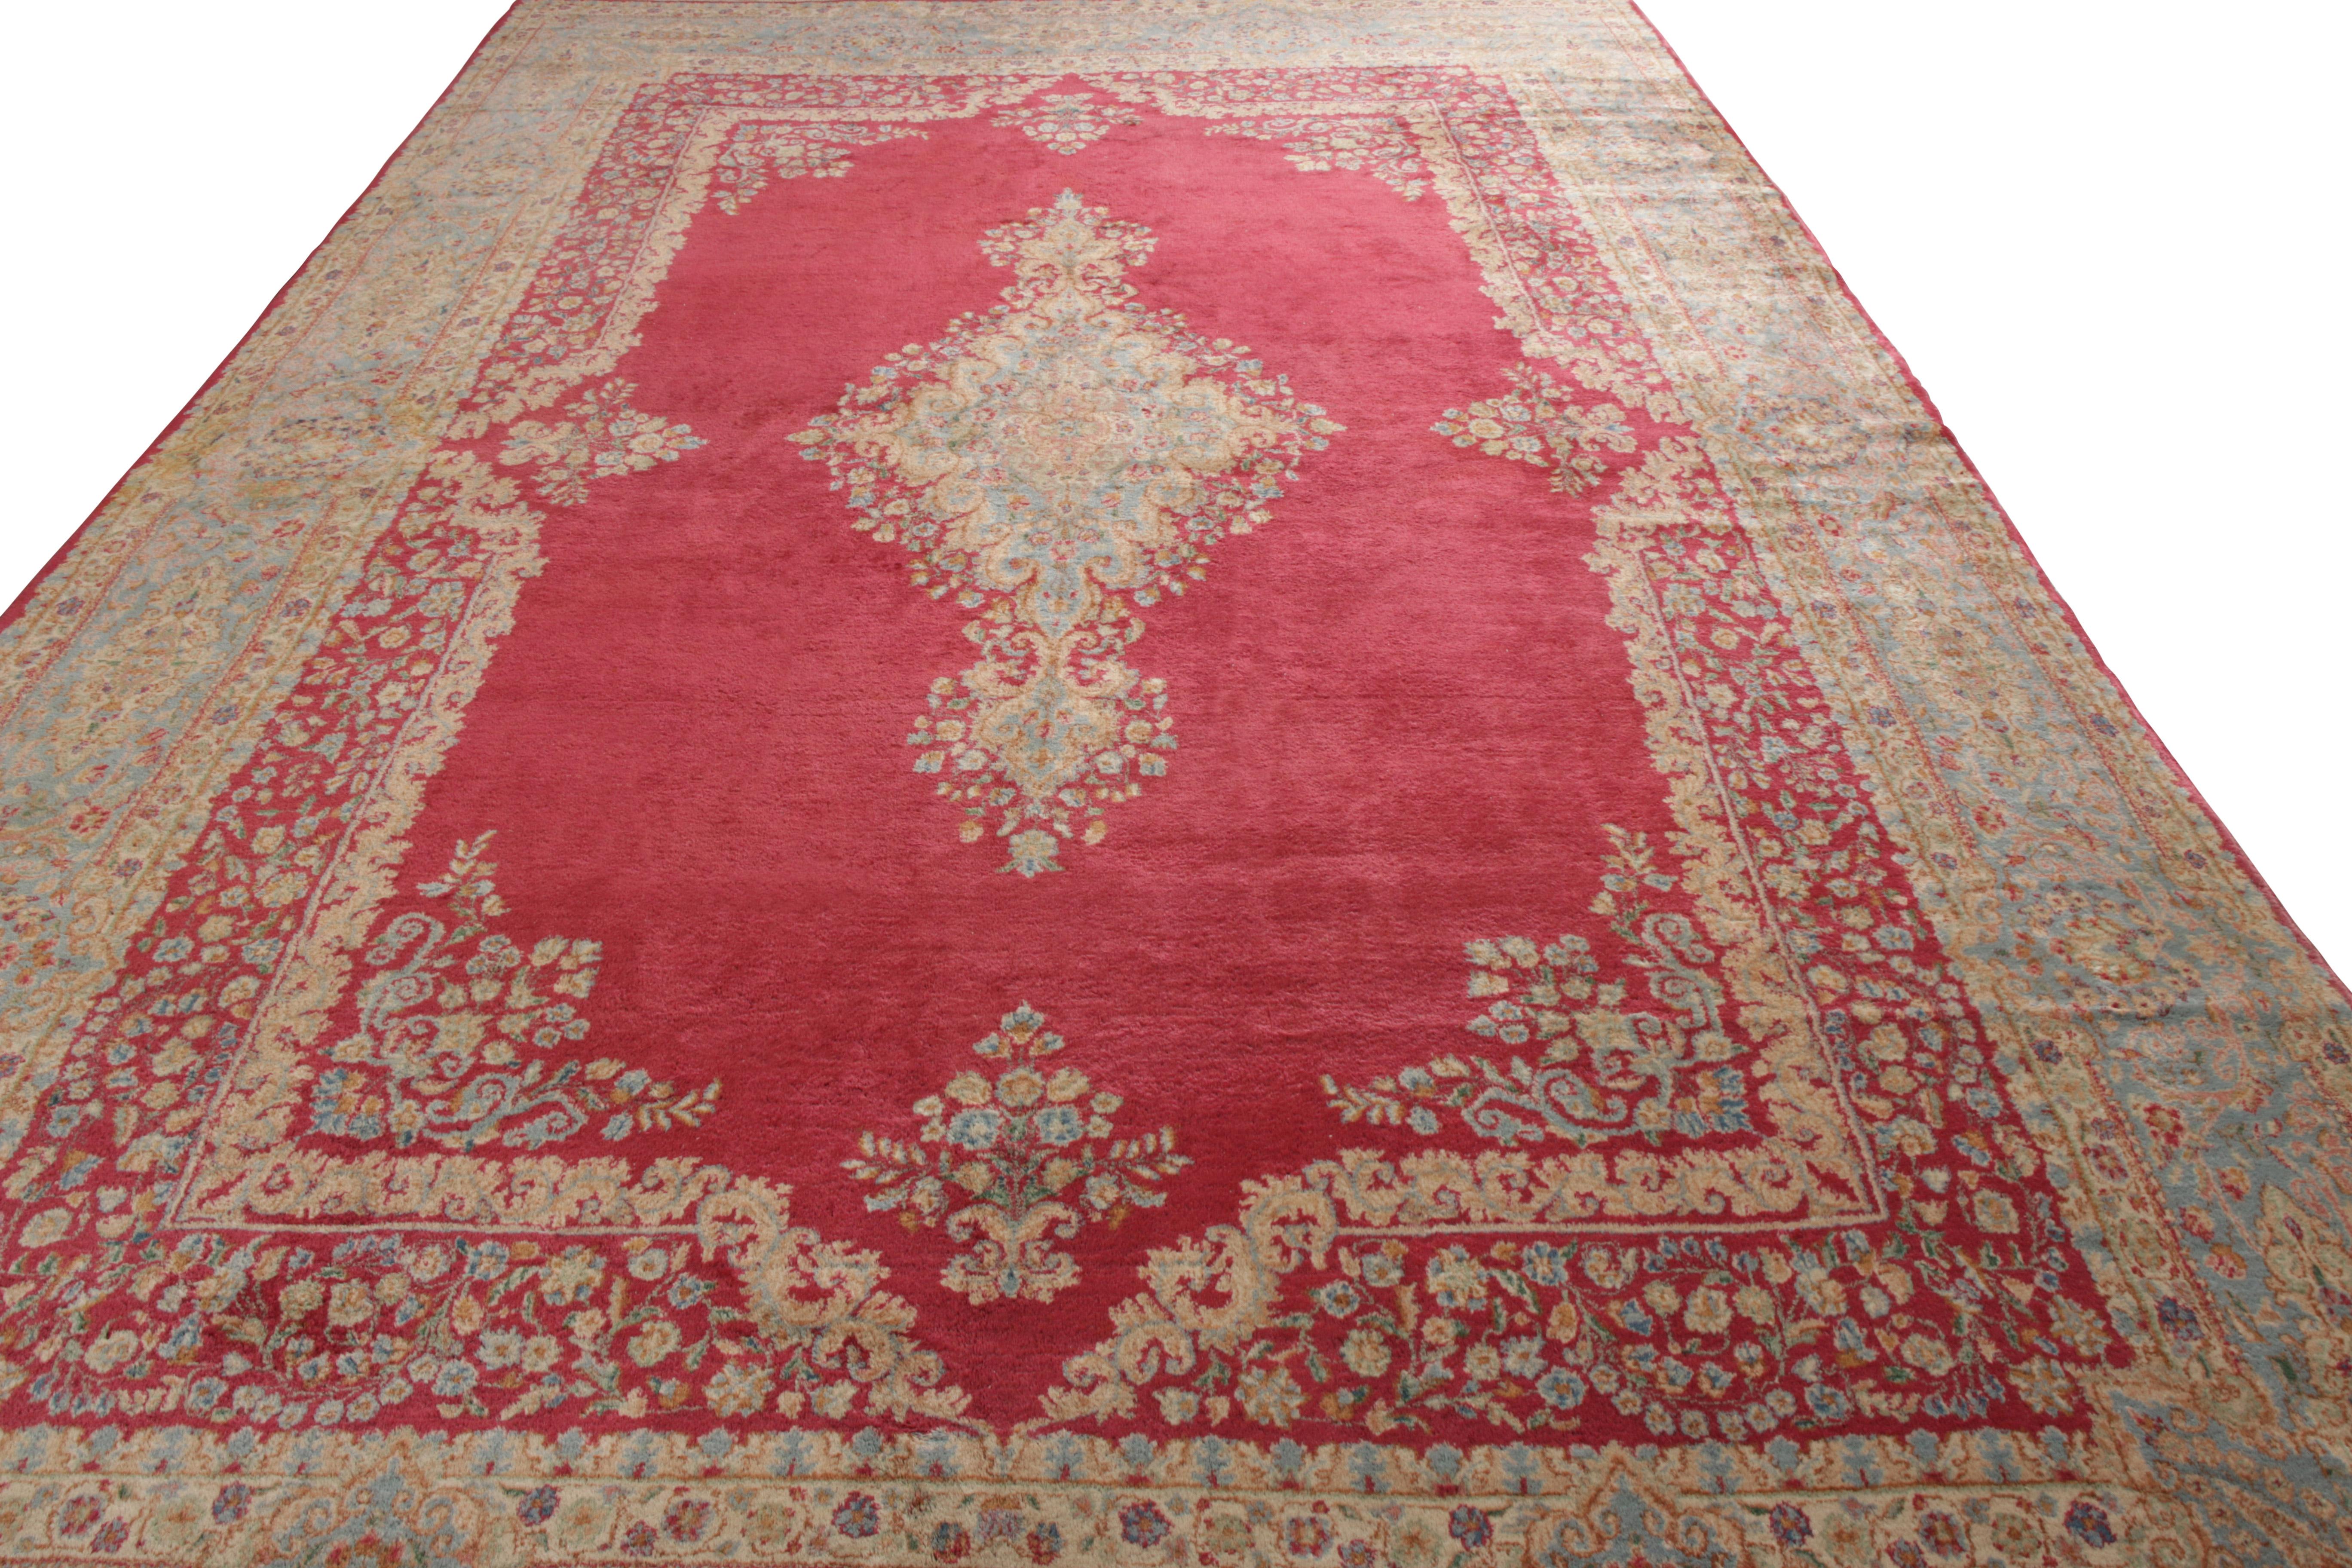 Handwoven in wool, this 10x16 antique Persian Kerman rug originating circa 1920-1930, is a masterpiece from one of the most sought-after weaving traditions in Persian city rugs. 

On the Design: 

Admirers of the craft will appreciate this